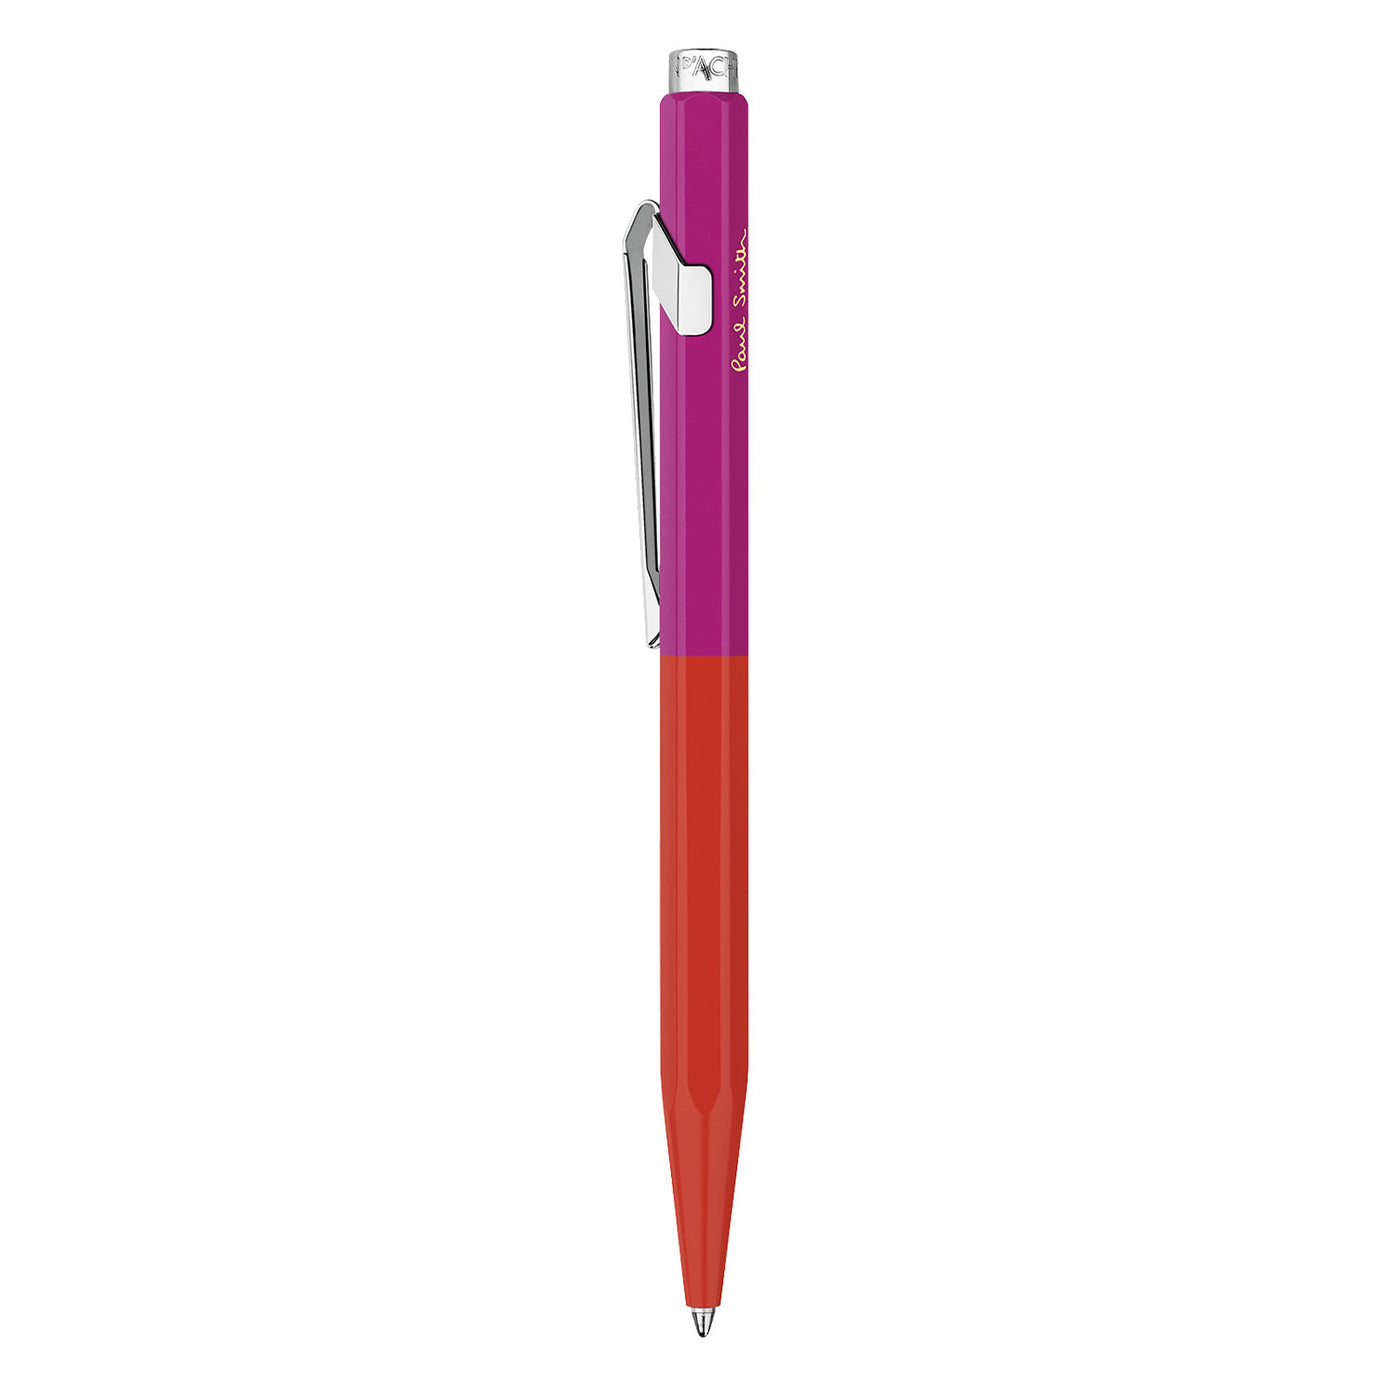 Caran d'Ache 849 Paul Smith Ball Pen - Warm Red & Melrose Pink (Limited Edition) 2